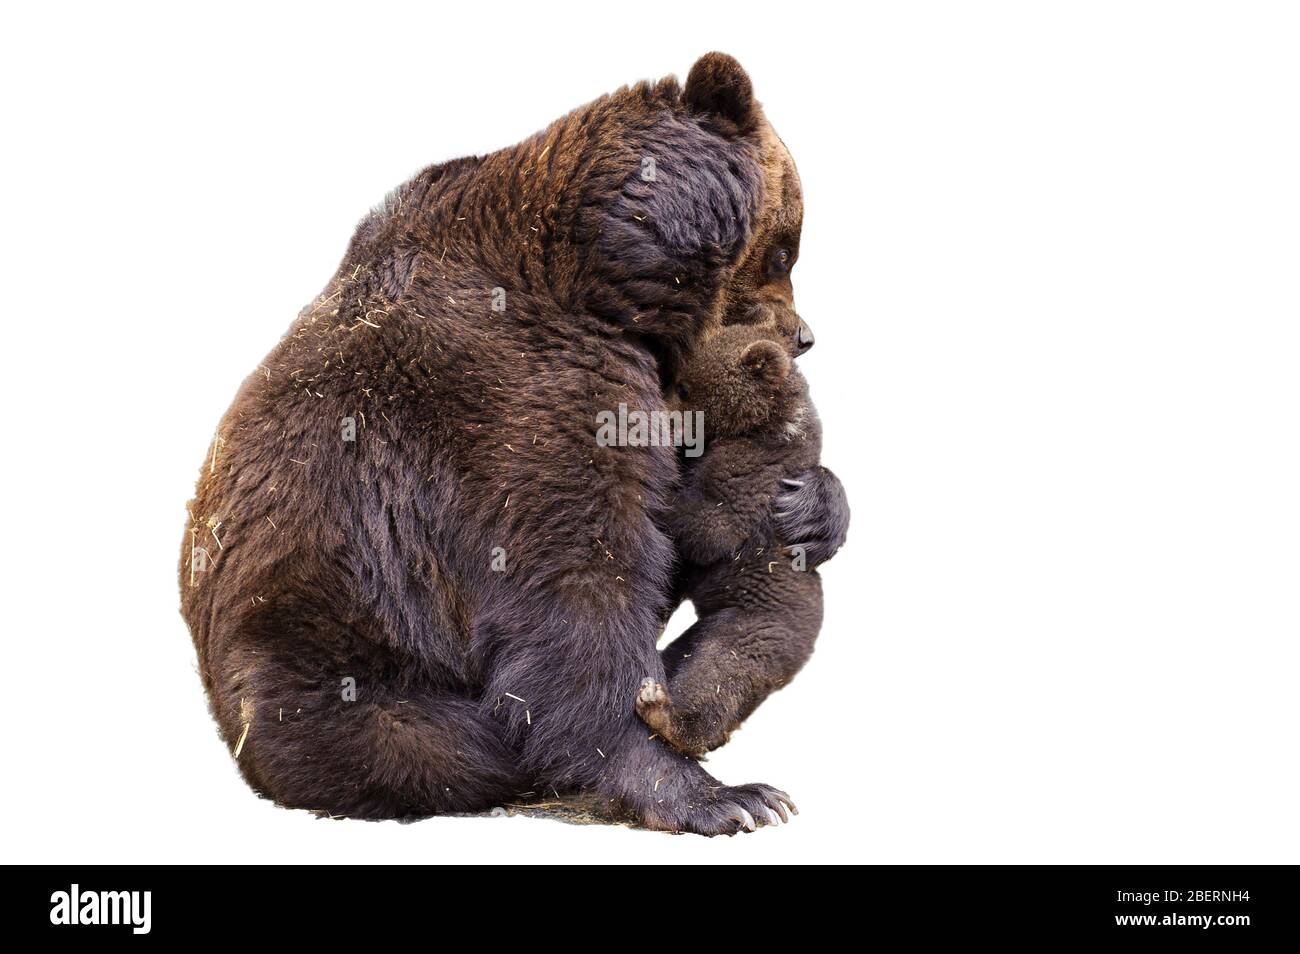 Female brown bear, sitting with a bear cub on a white background. Stock Photo